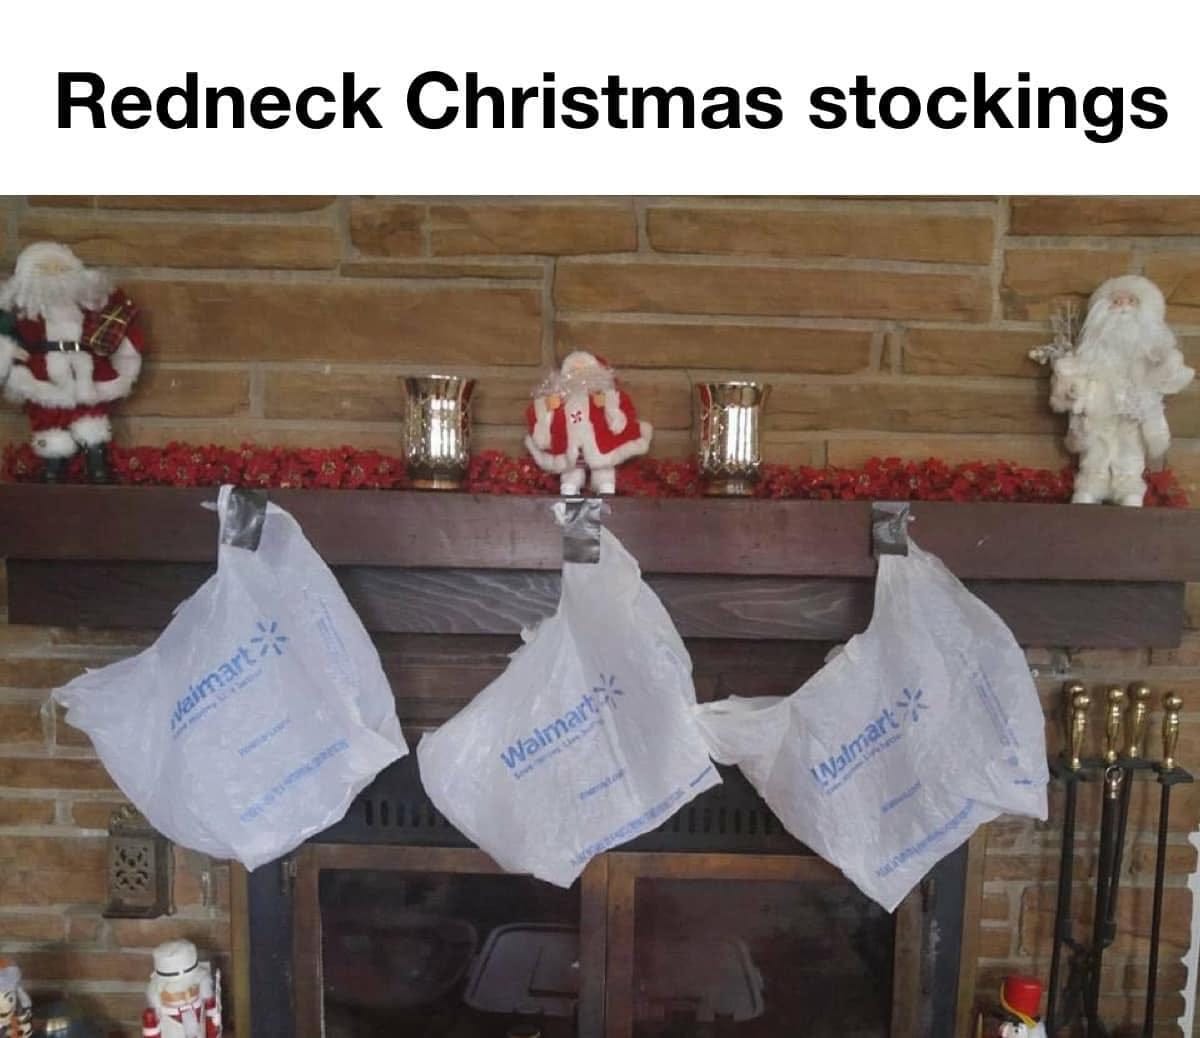 May be an image of Christmas stocking and text